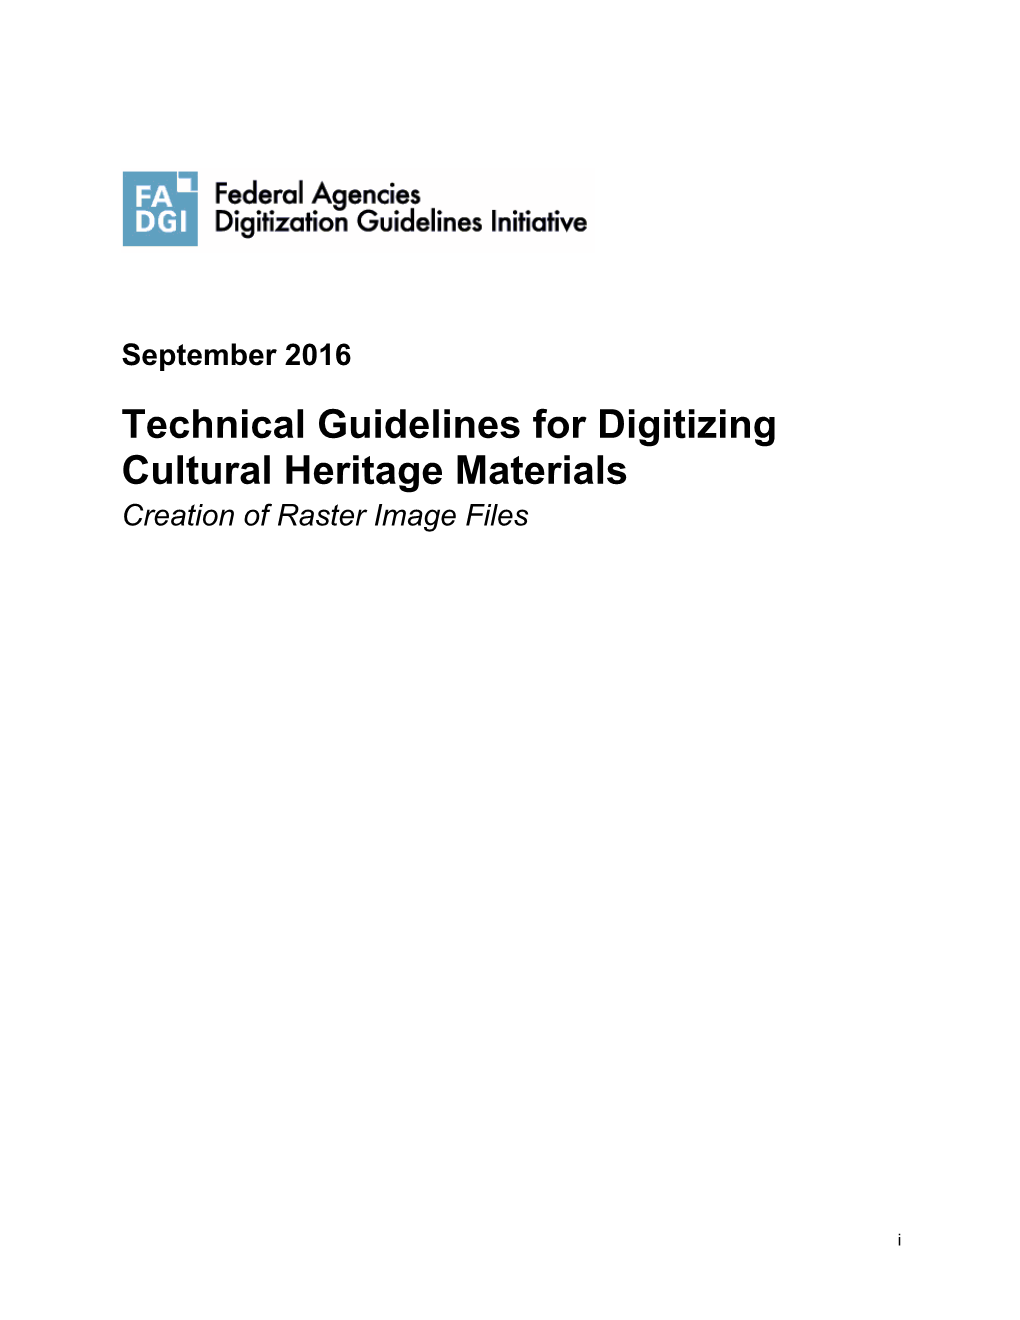 Technical Guidelines for Digitizing Cultural Heritage Materials Creation of Raster Image Files